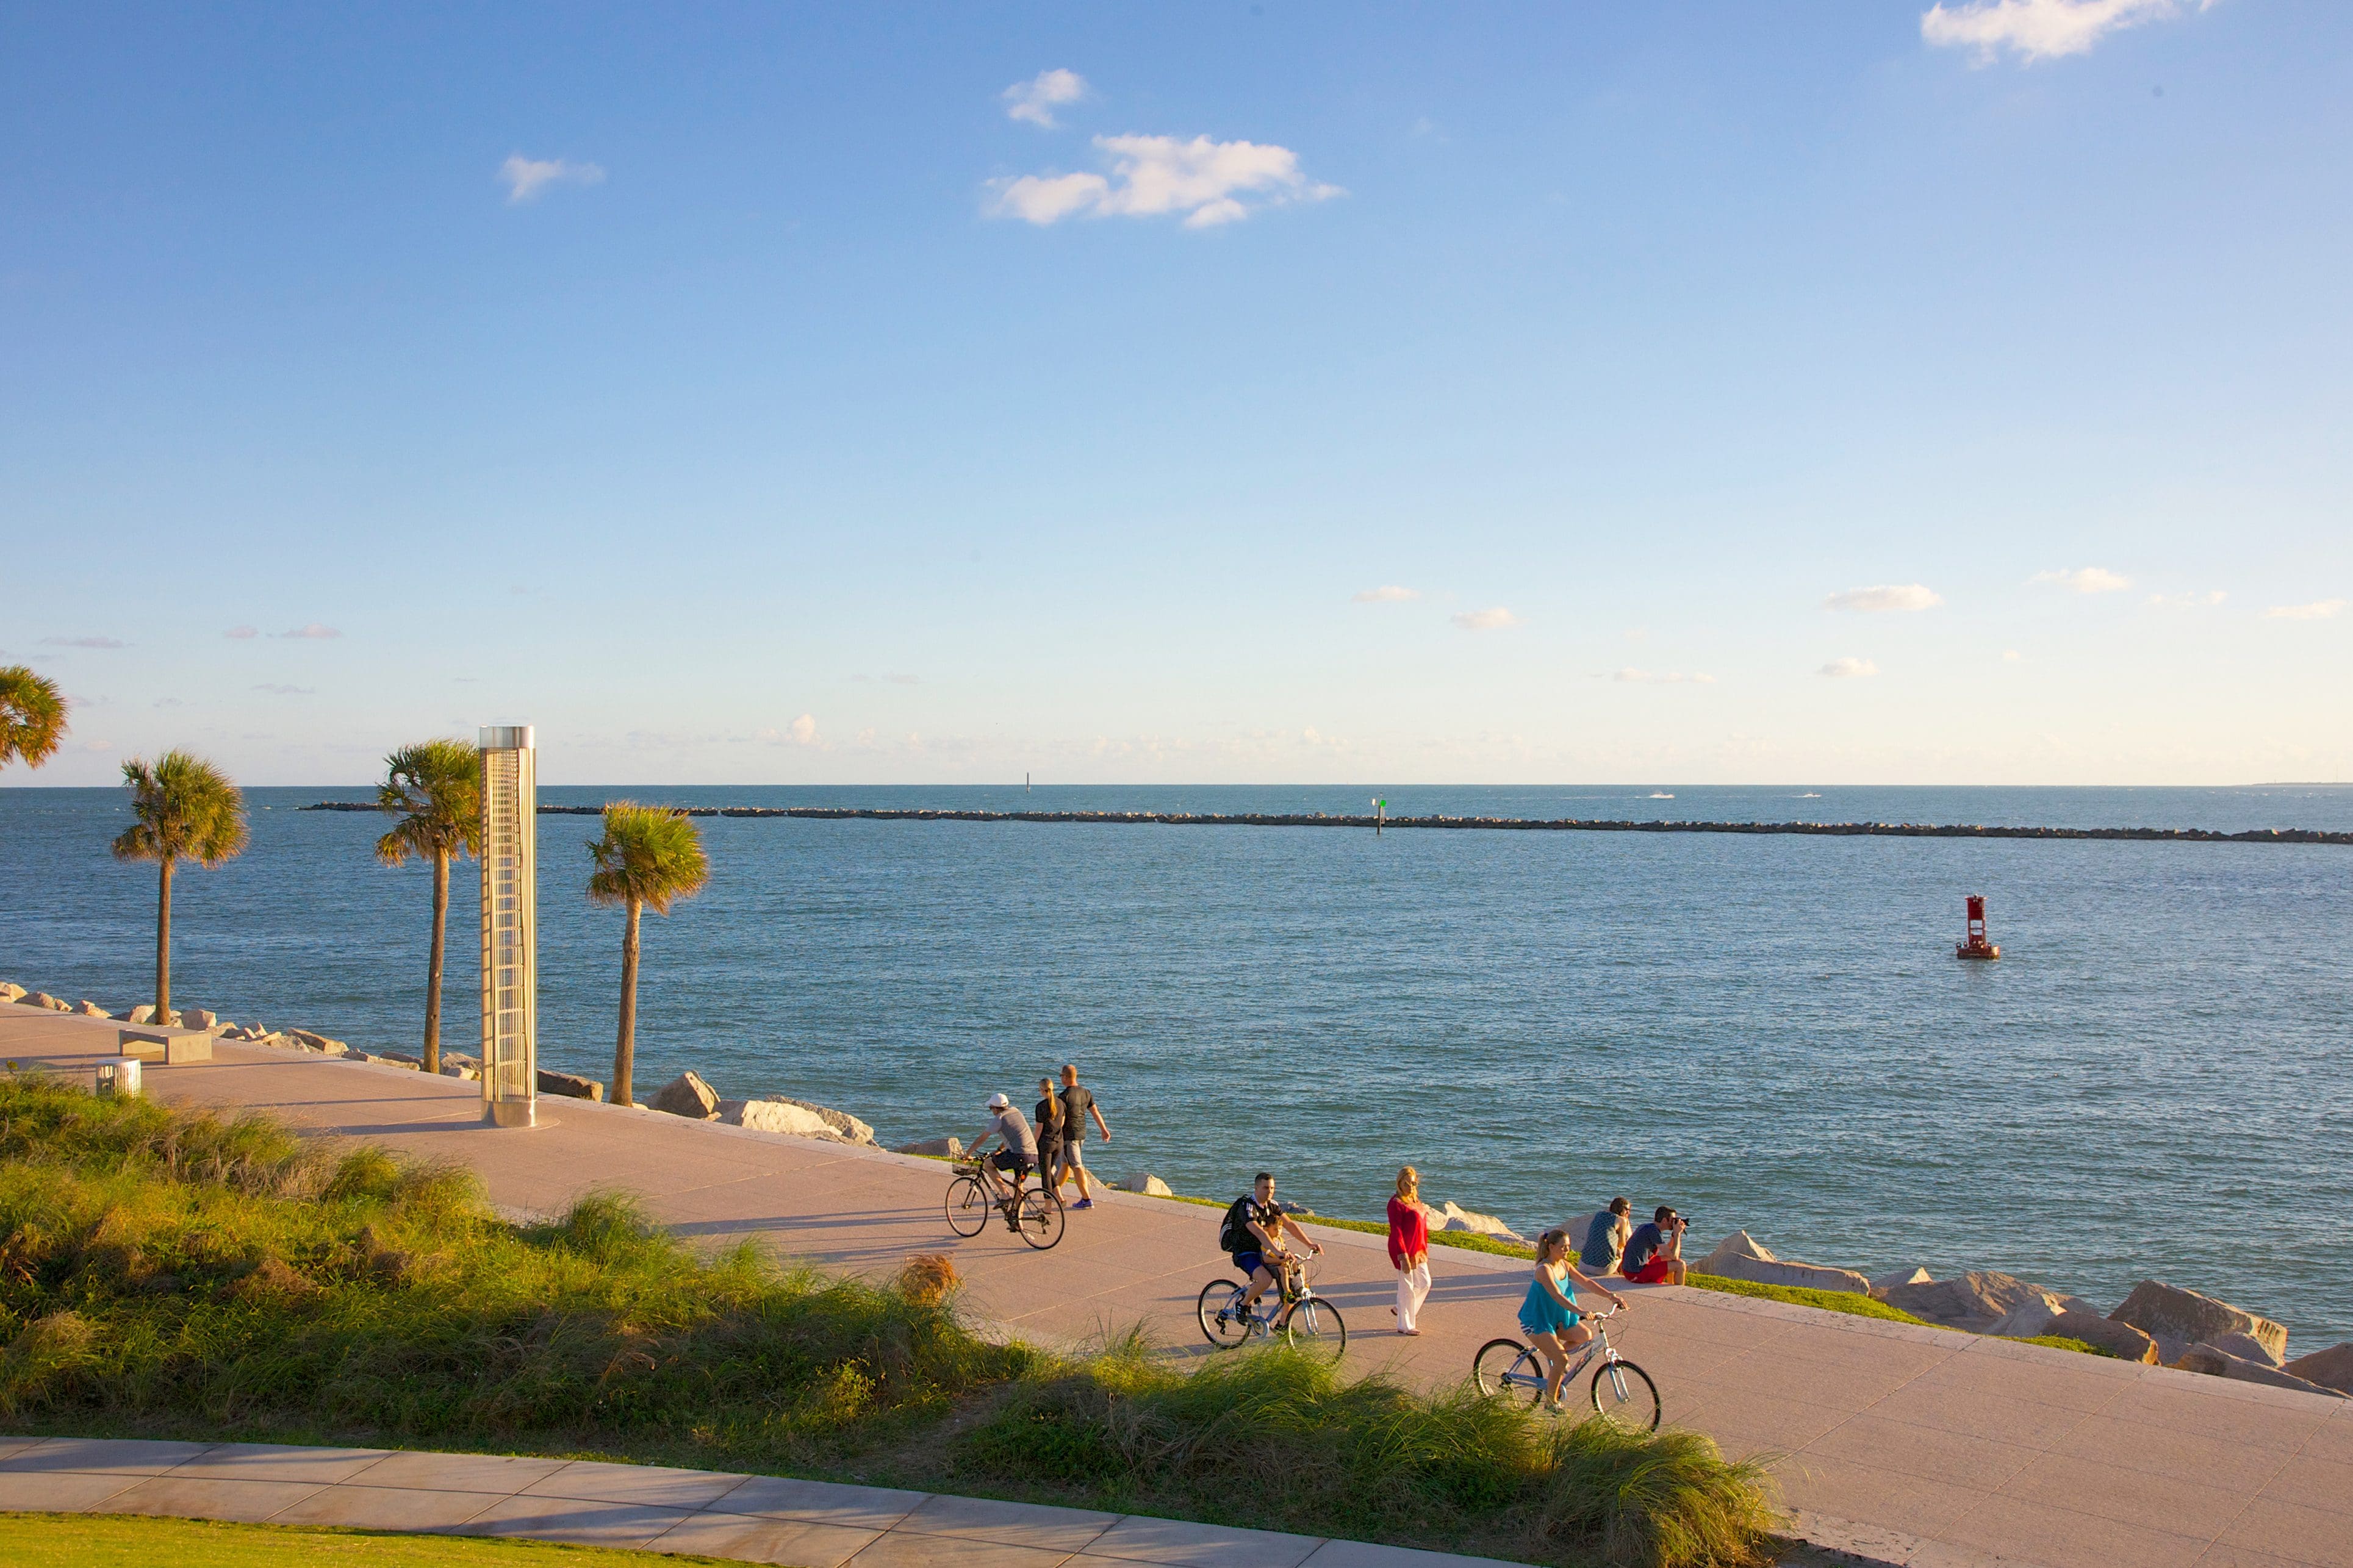 Looking out onto the water from the seaside promenade at South Pointe Park